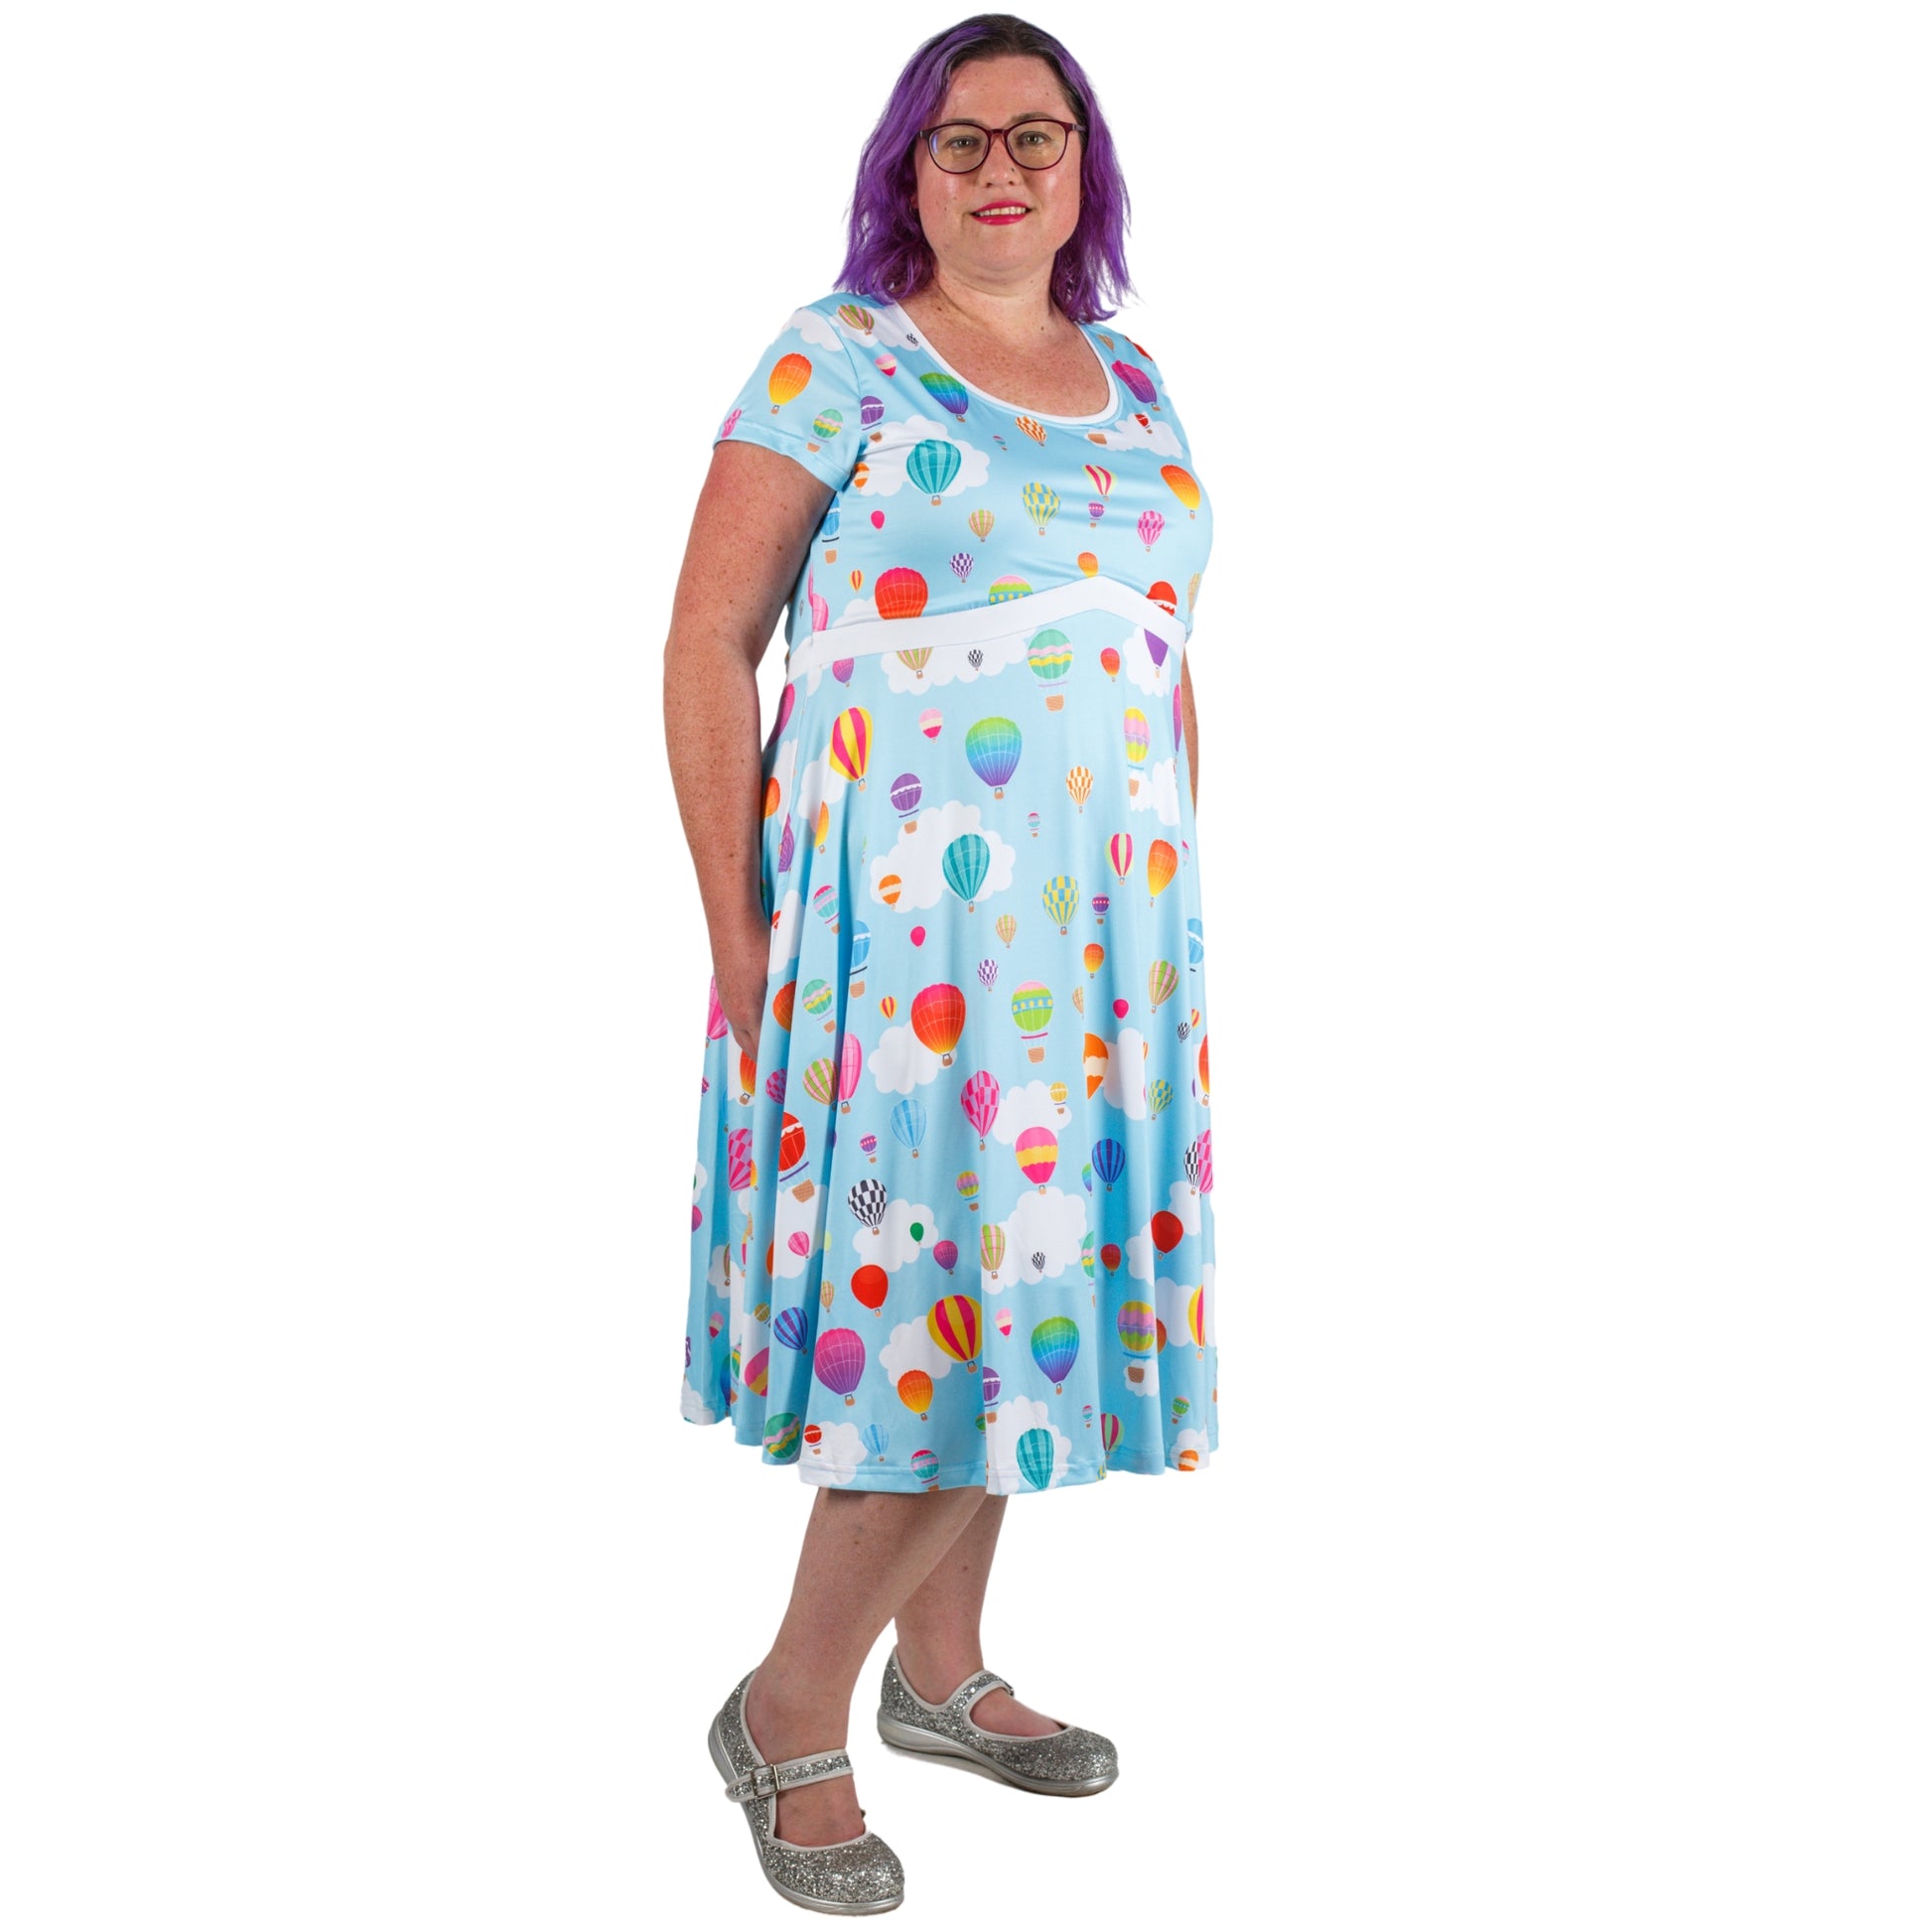 Whimsy Tea Dress by RainbowsAndFairies.com (Balloons - Hot Air Balloon - Dress With Pockets - Rockabilly - Vintage Inspired) - SKU: CL_TEADR_WHIMS_ORG - Pic 04